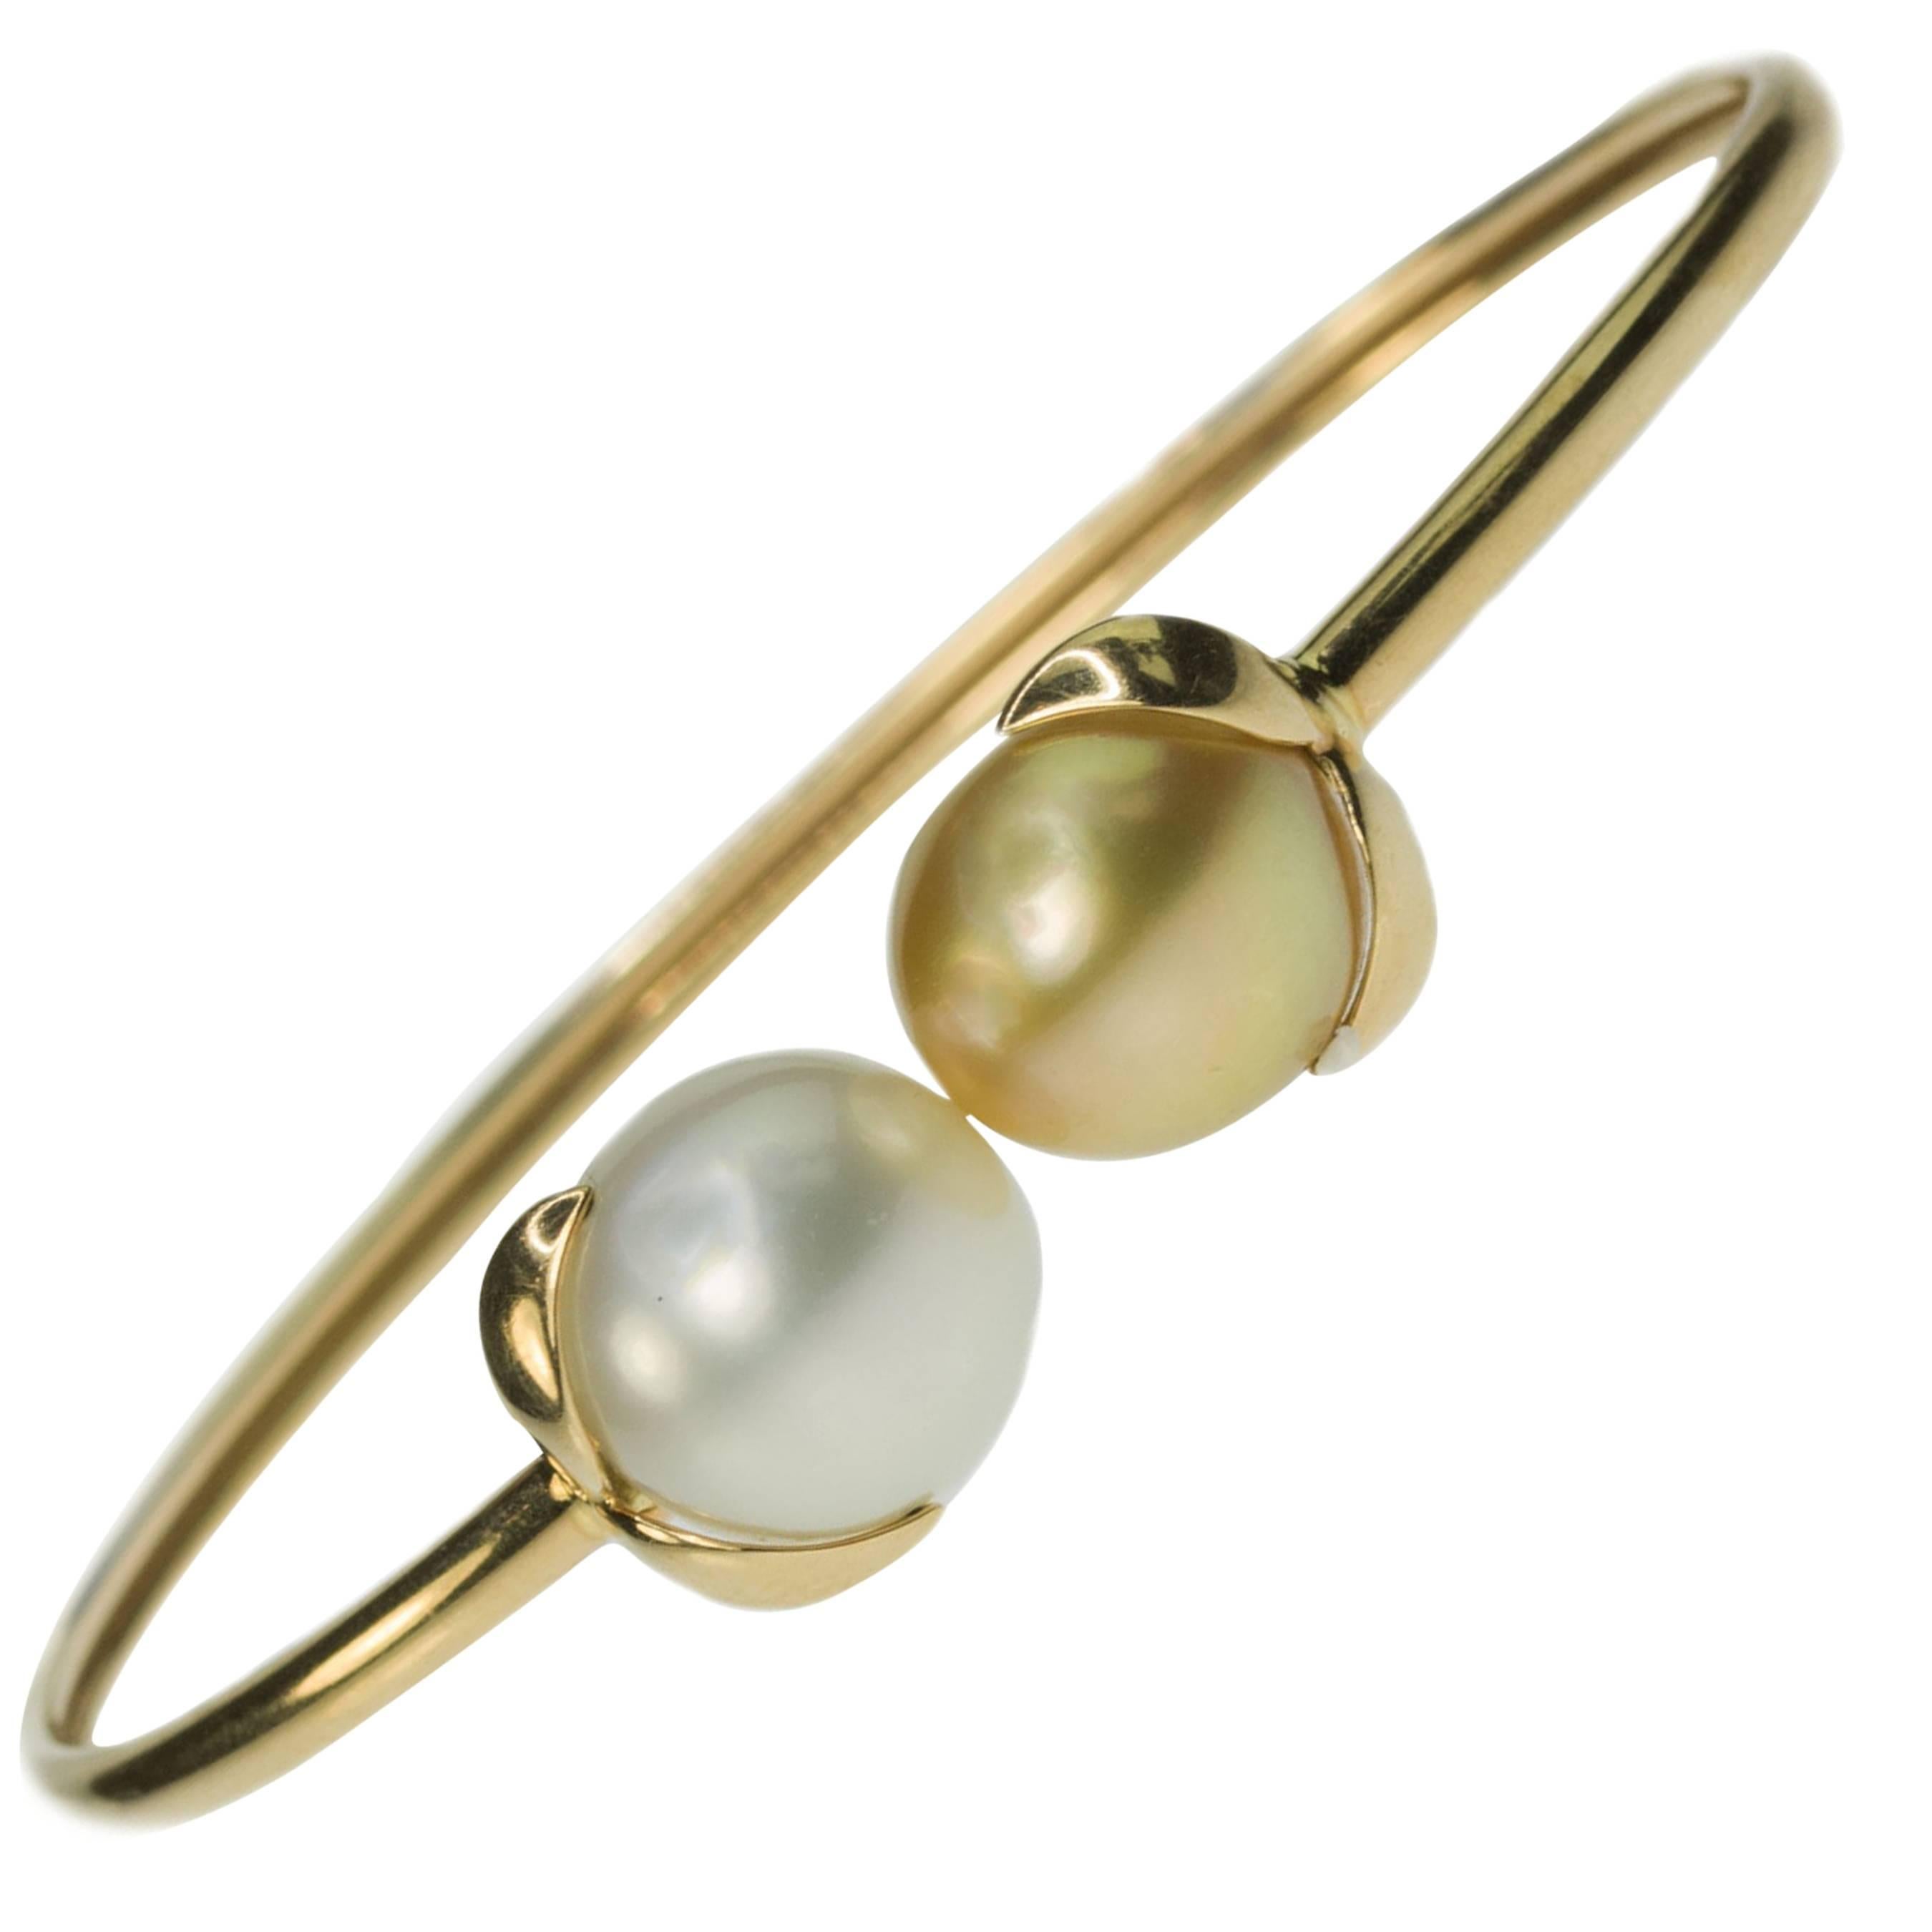 Iridesse Gold Bangle With Gold and White Pearls